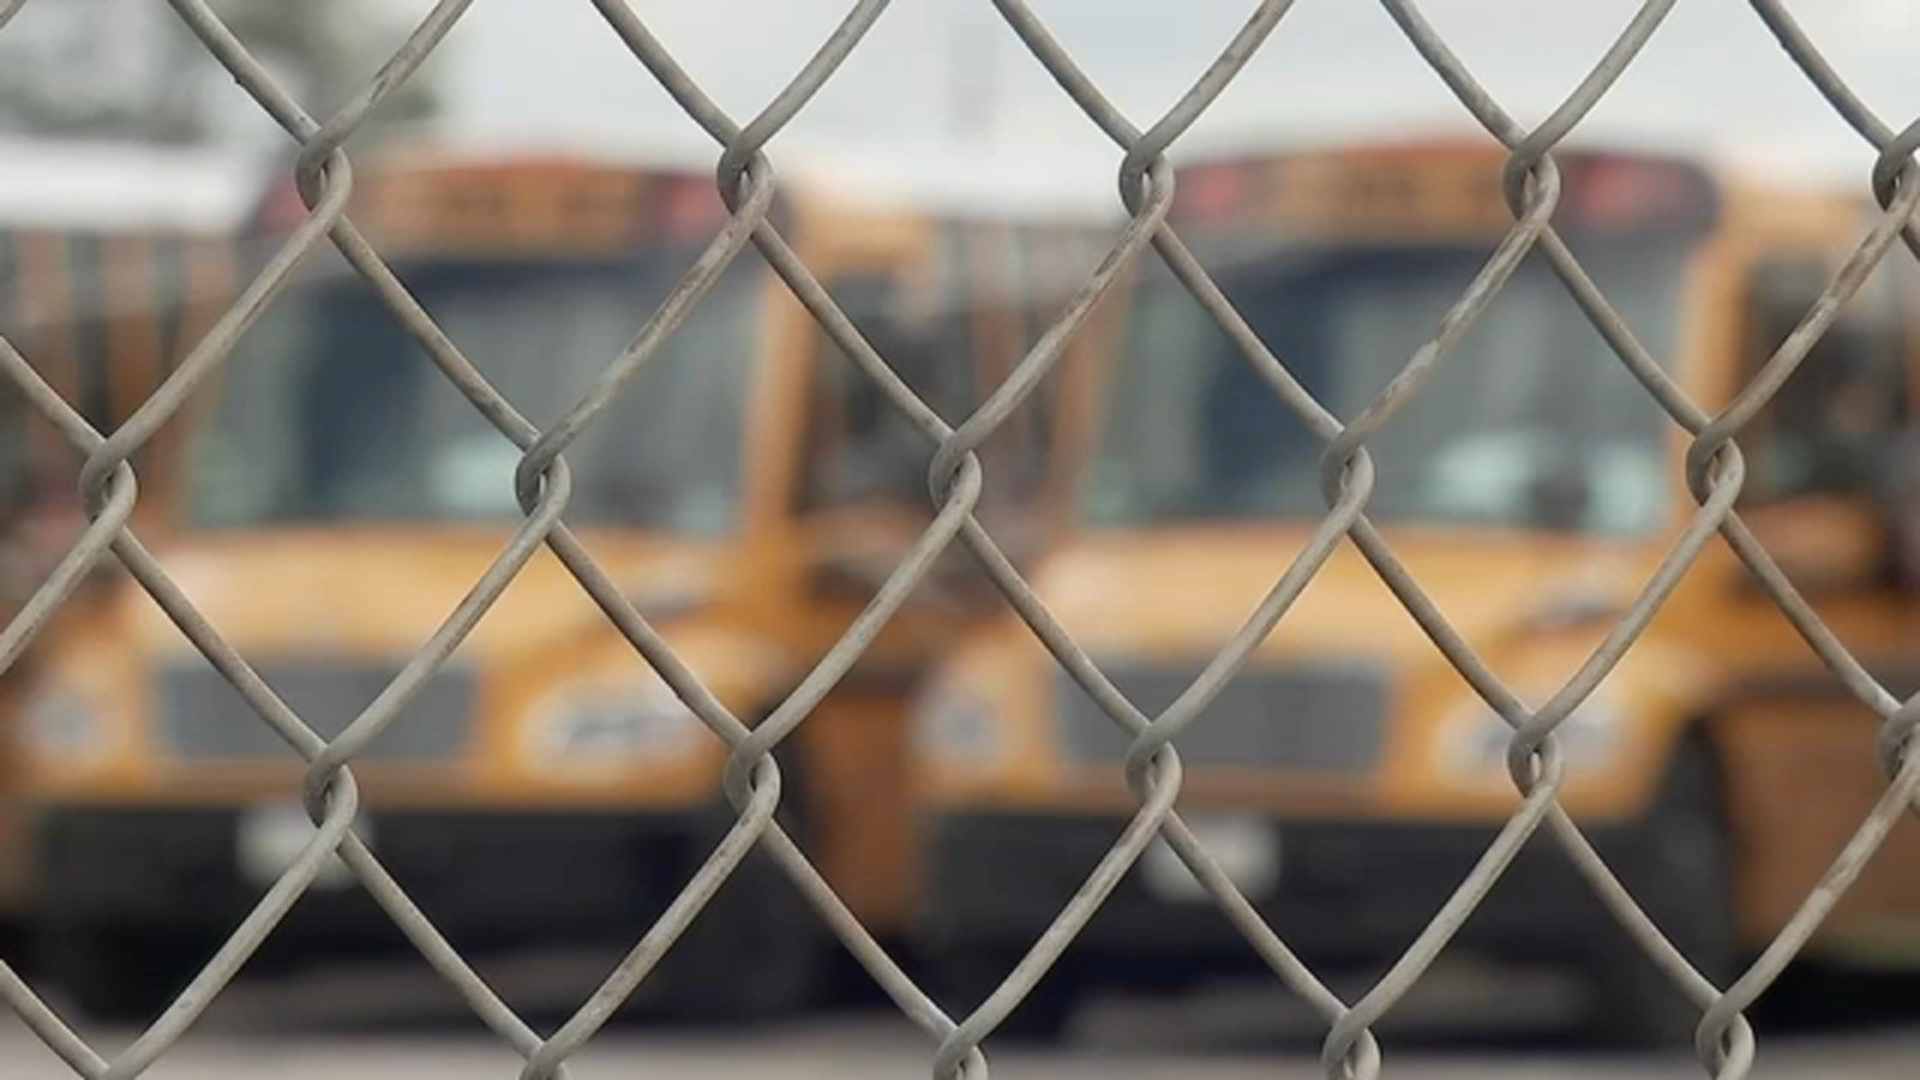 School Girl Japneese Rap Sex In Bus Video - Aldine ISD elementary student repeatedly raped on school bus by older boy,  6-year-old's mother says - ABC13 Houston